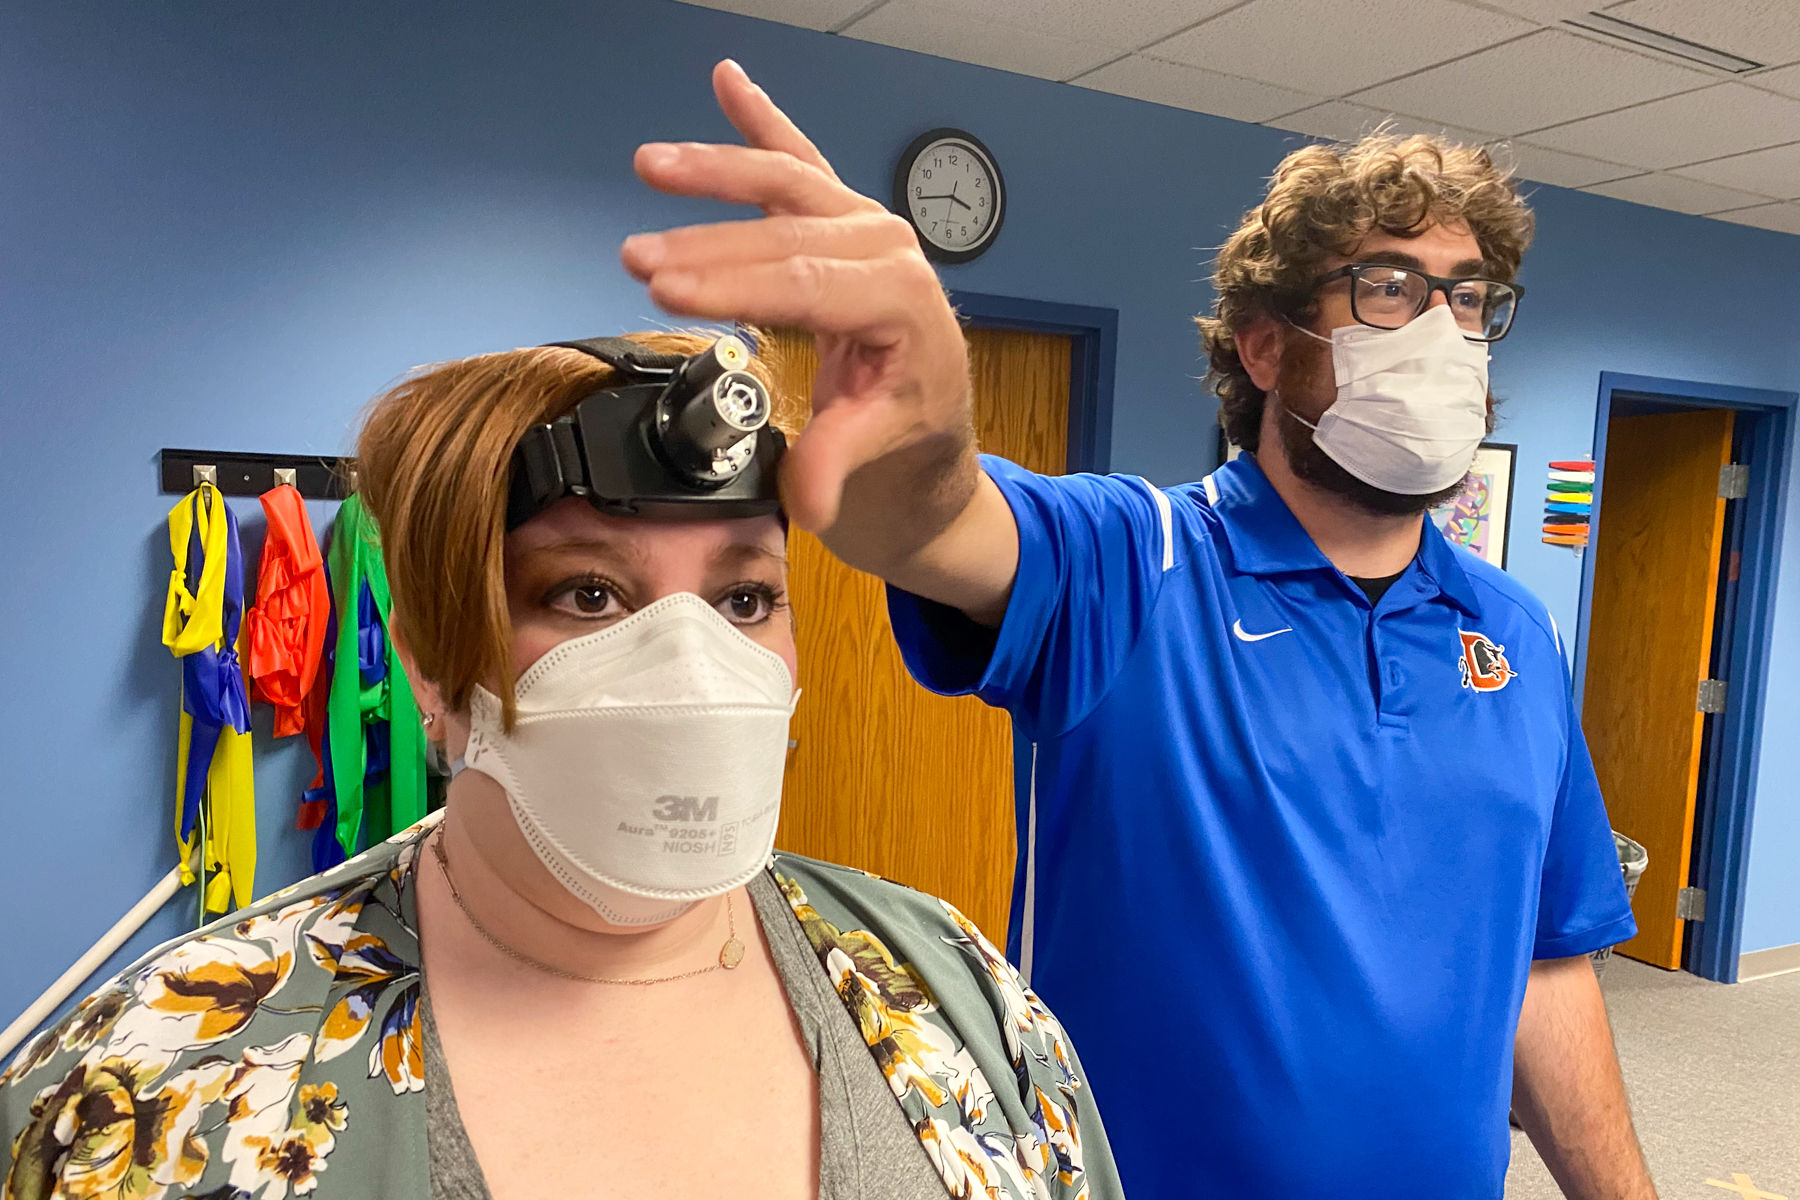 Long COVID patient Alex Trebino and physical therapist Dan Stoot at High Definition Physical Therapy in Englewood. Some of her therapy involves tracing images on a wall using a laser on a headlamp and others in her hands.